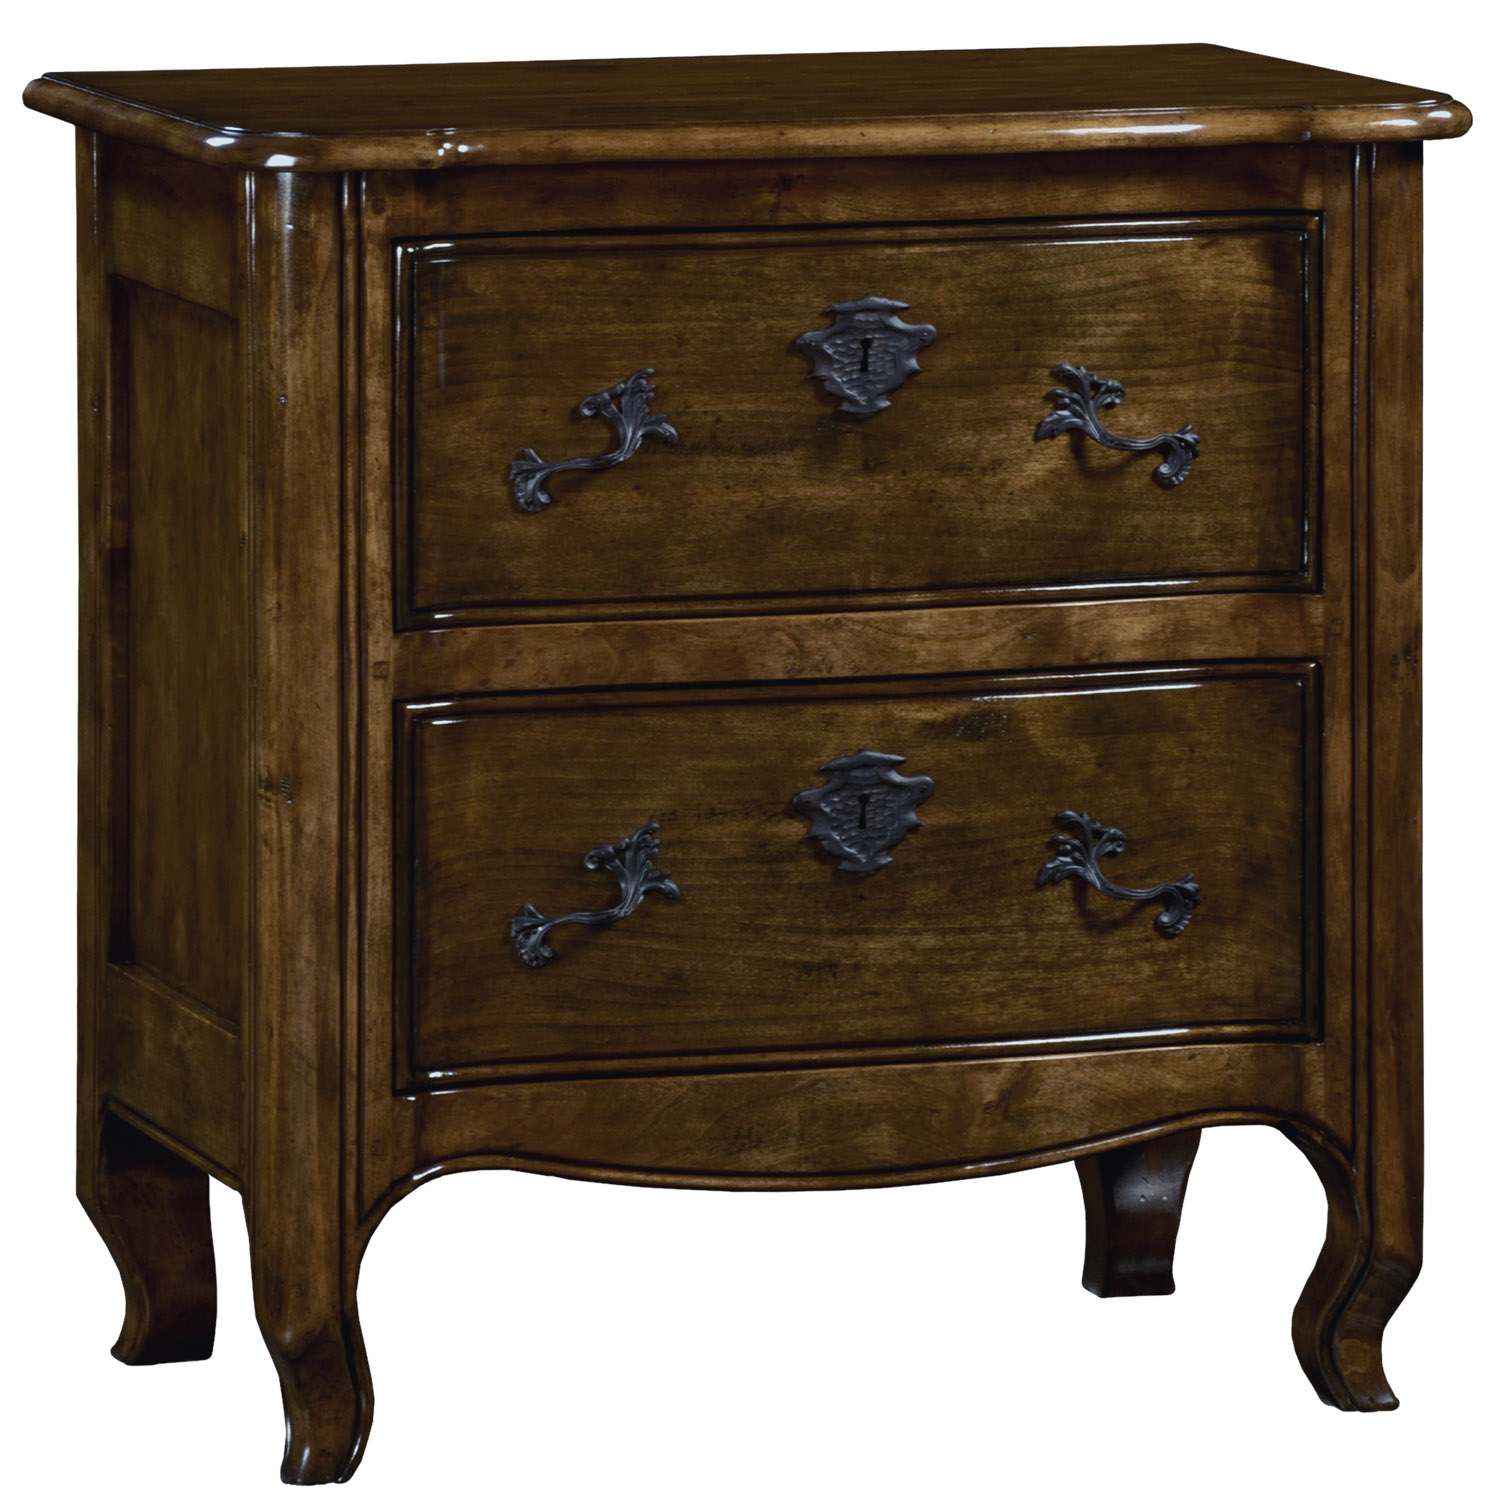 Catarina traditional transitional chest of drawers dresser by Woodland furniture in Idaho Falls